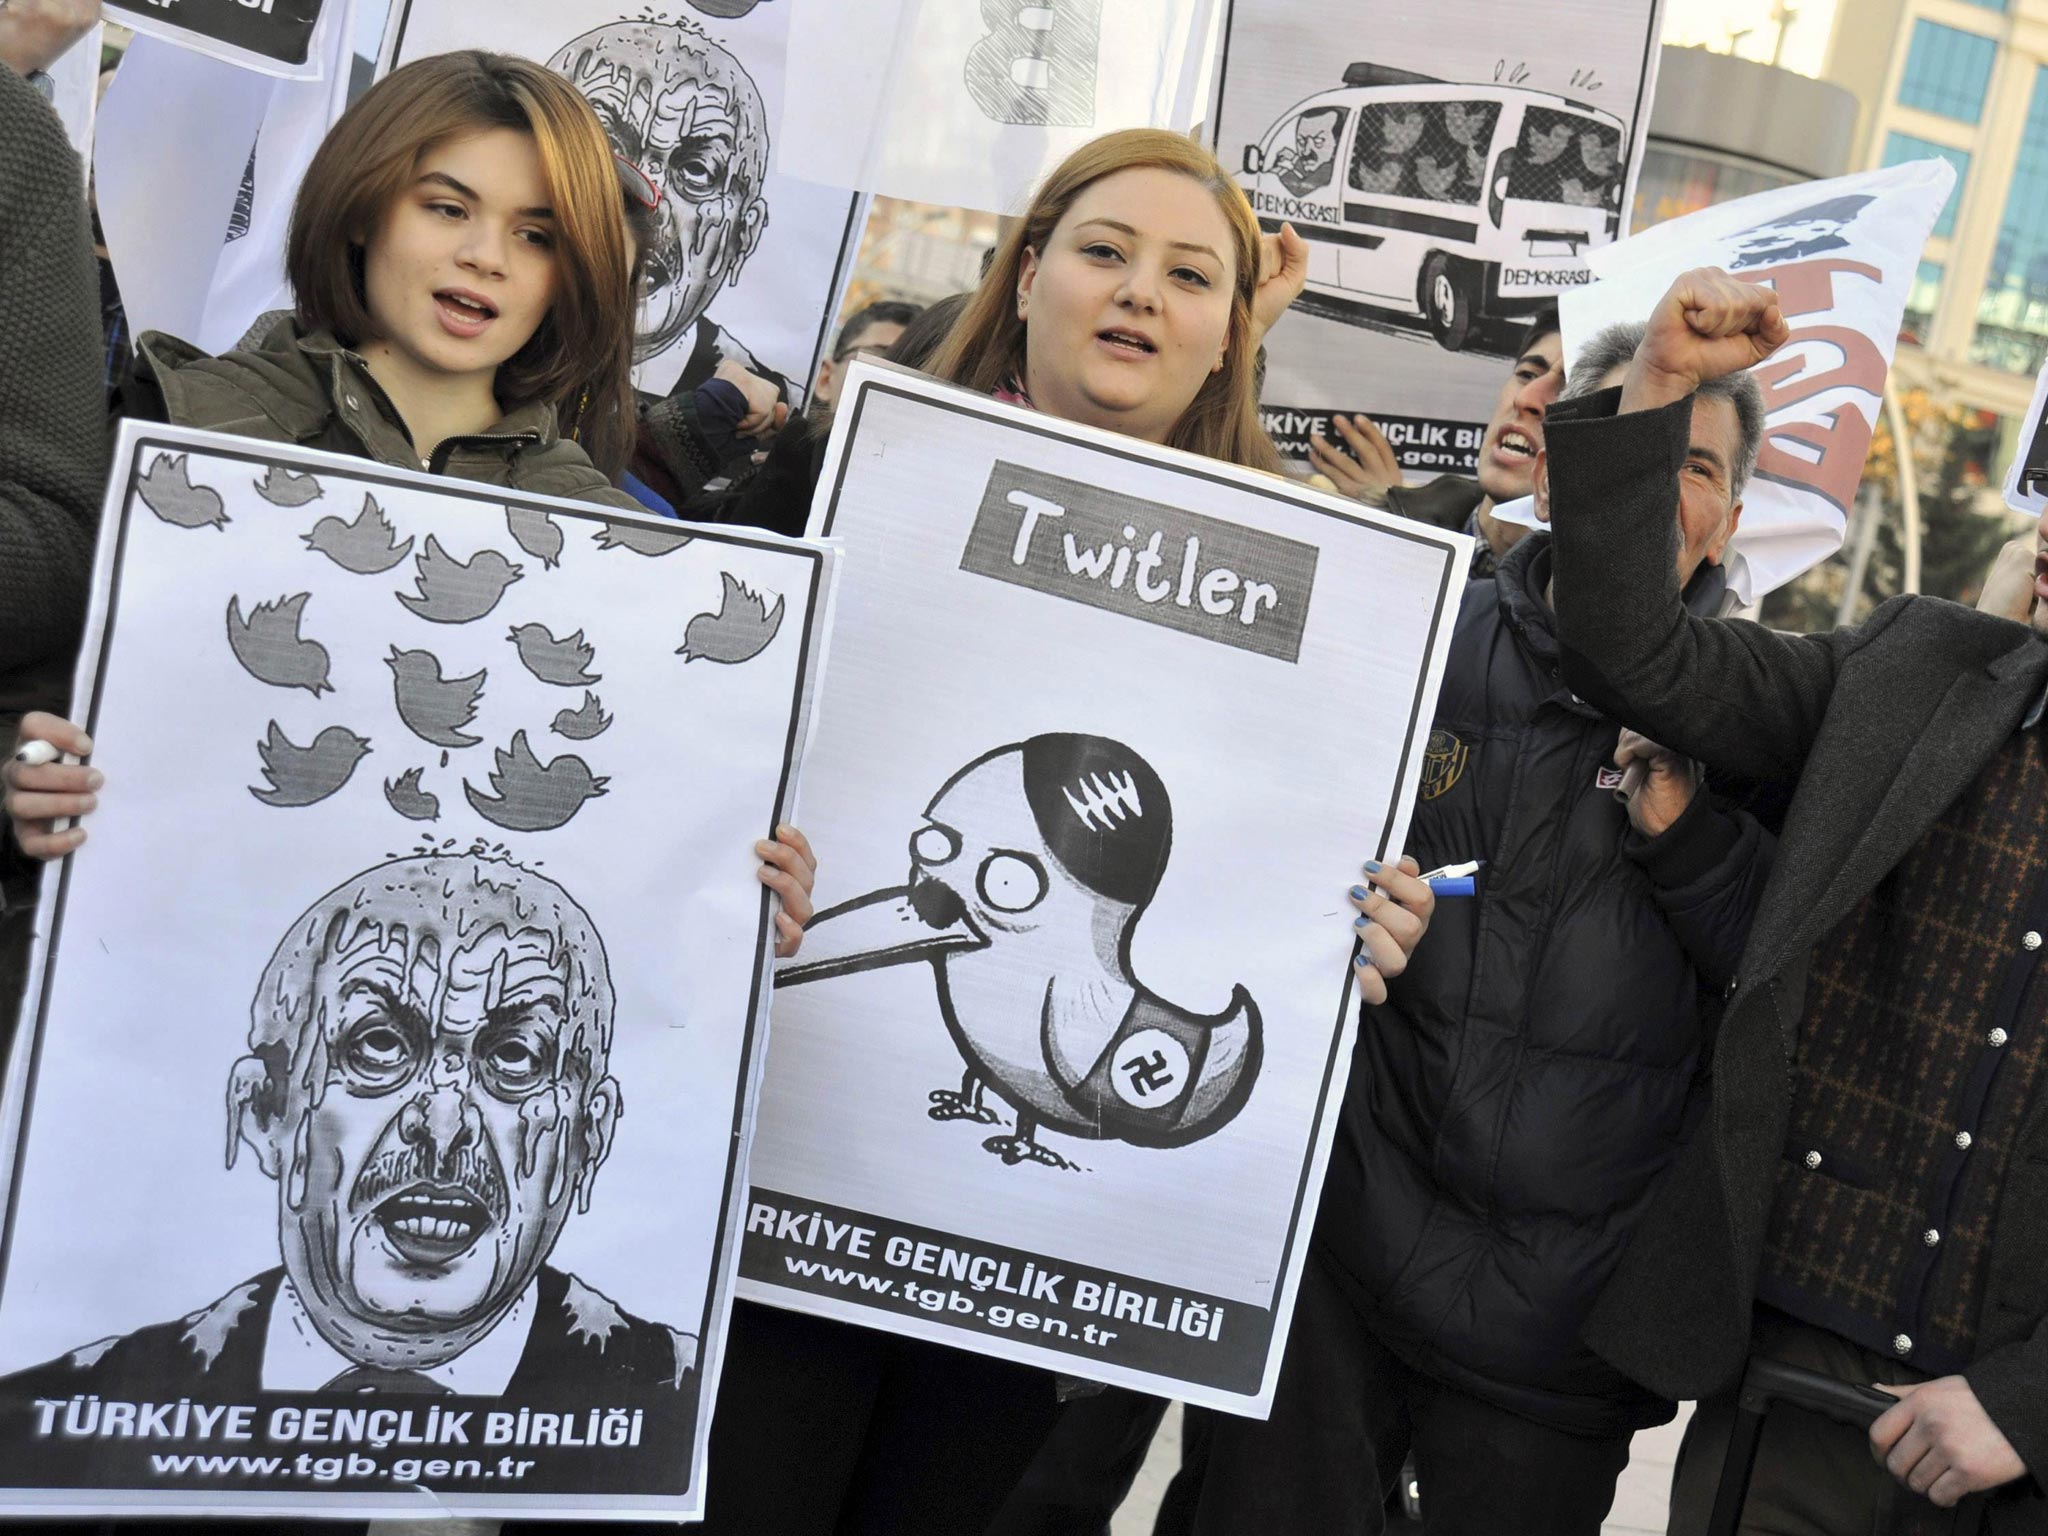 Members of the Turkish Youth Union staged a protest in Ankara last week against an attempted ban on Twitter imposed by Prime
Minister Tayyip Erdogan, who vowed to ‘wipe out’ the social media website. He then turned his attention to YouTube